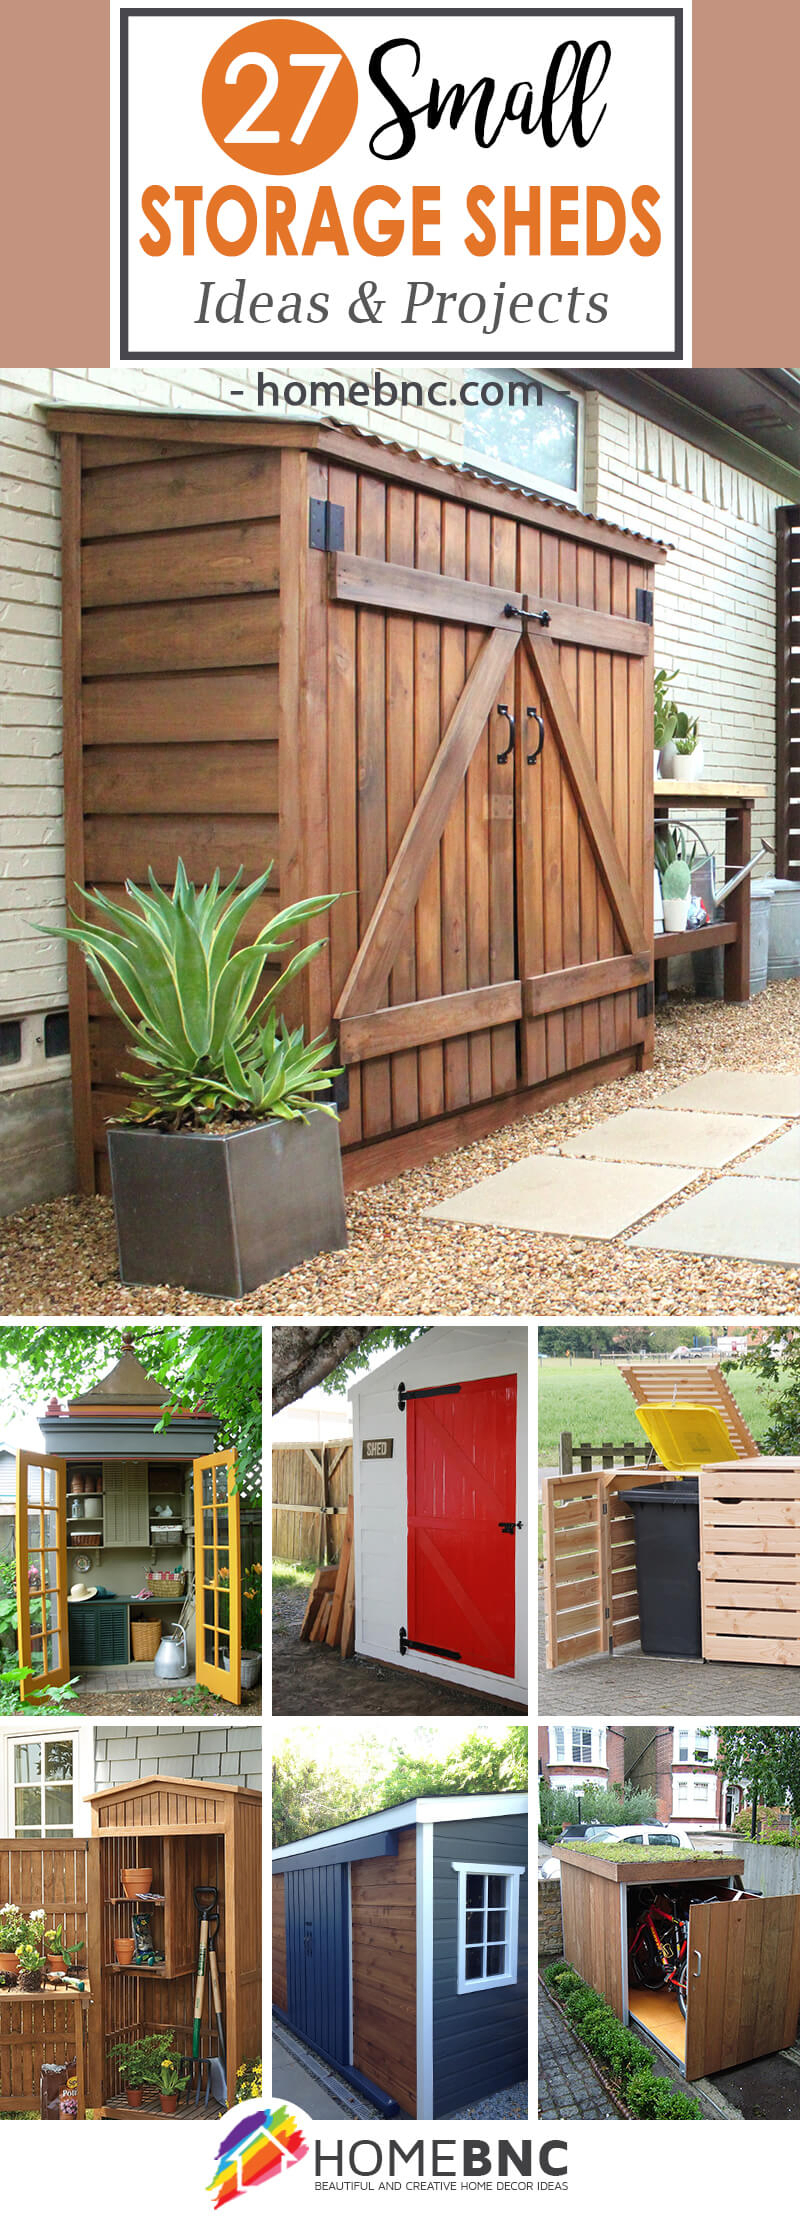 22.SIMPHOME.COM best small storage shed projects ideas and designs for 2019